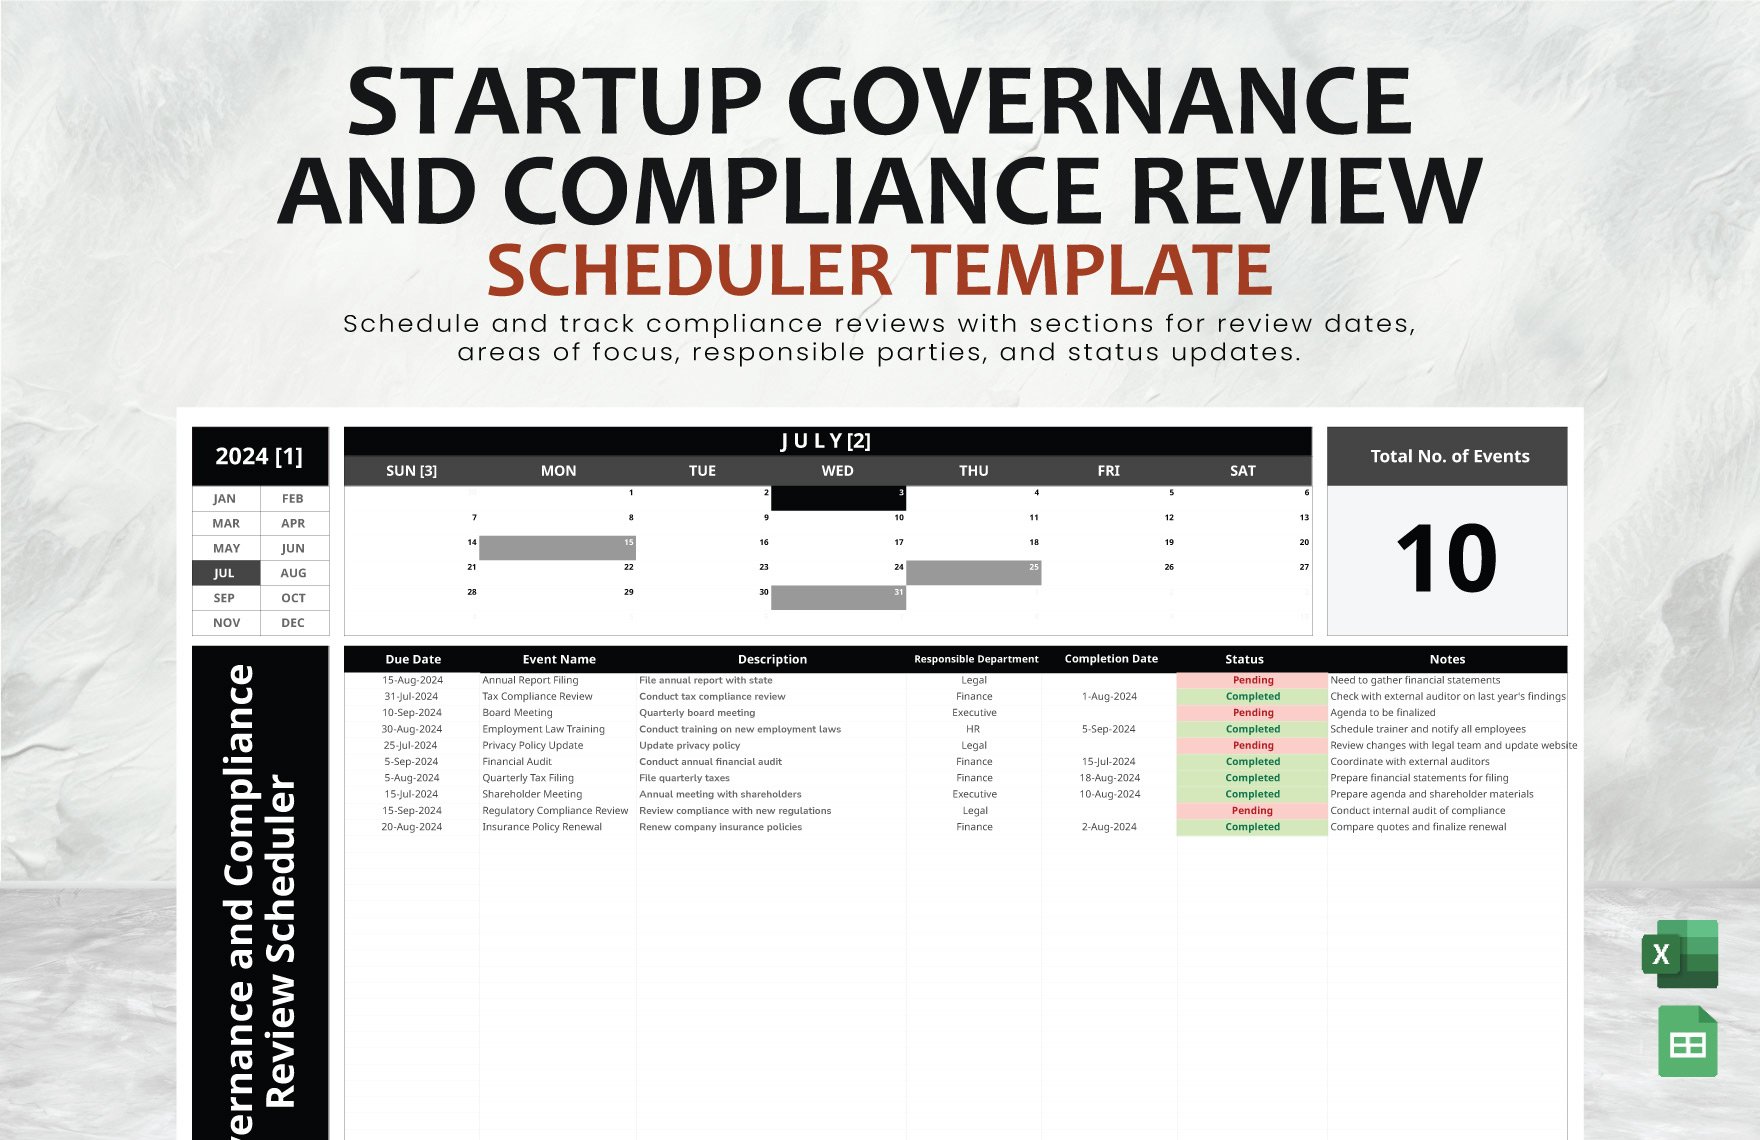 Startup Governance and Compliance Review Scheduler Template in Excel, Google Sheets